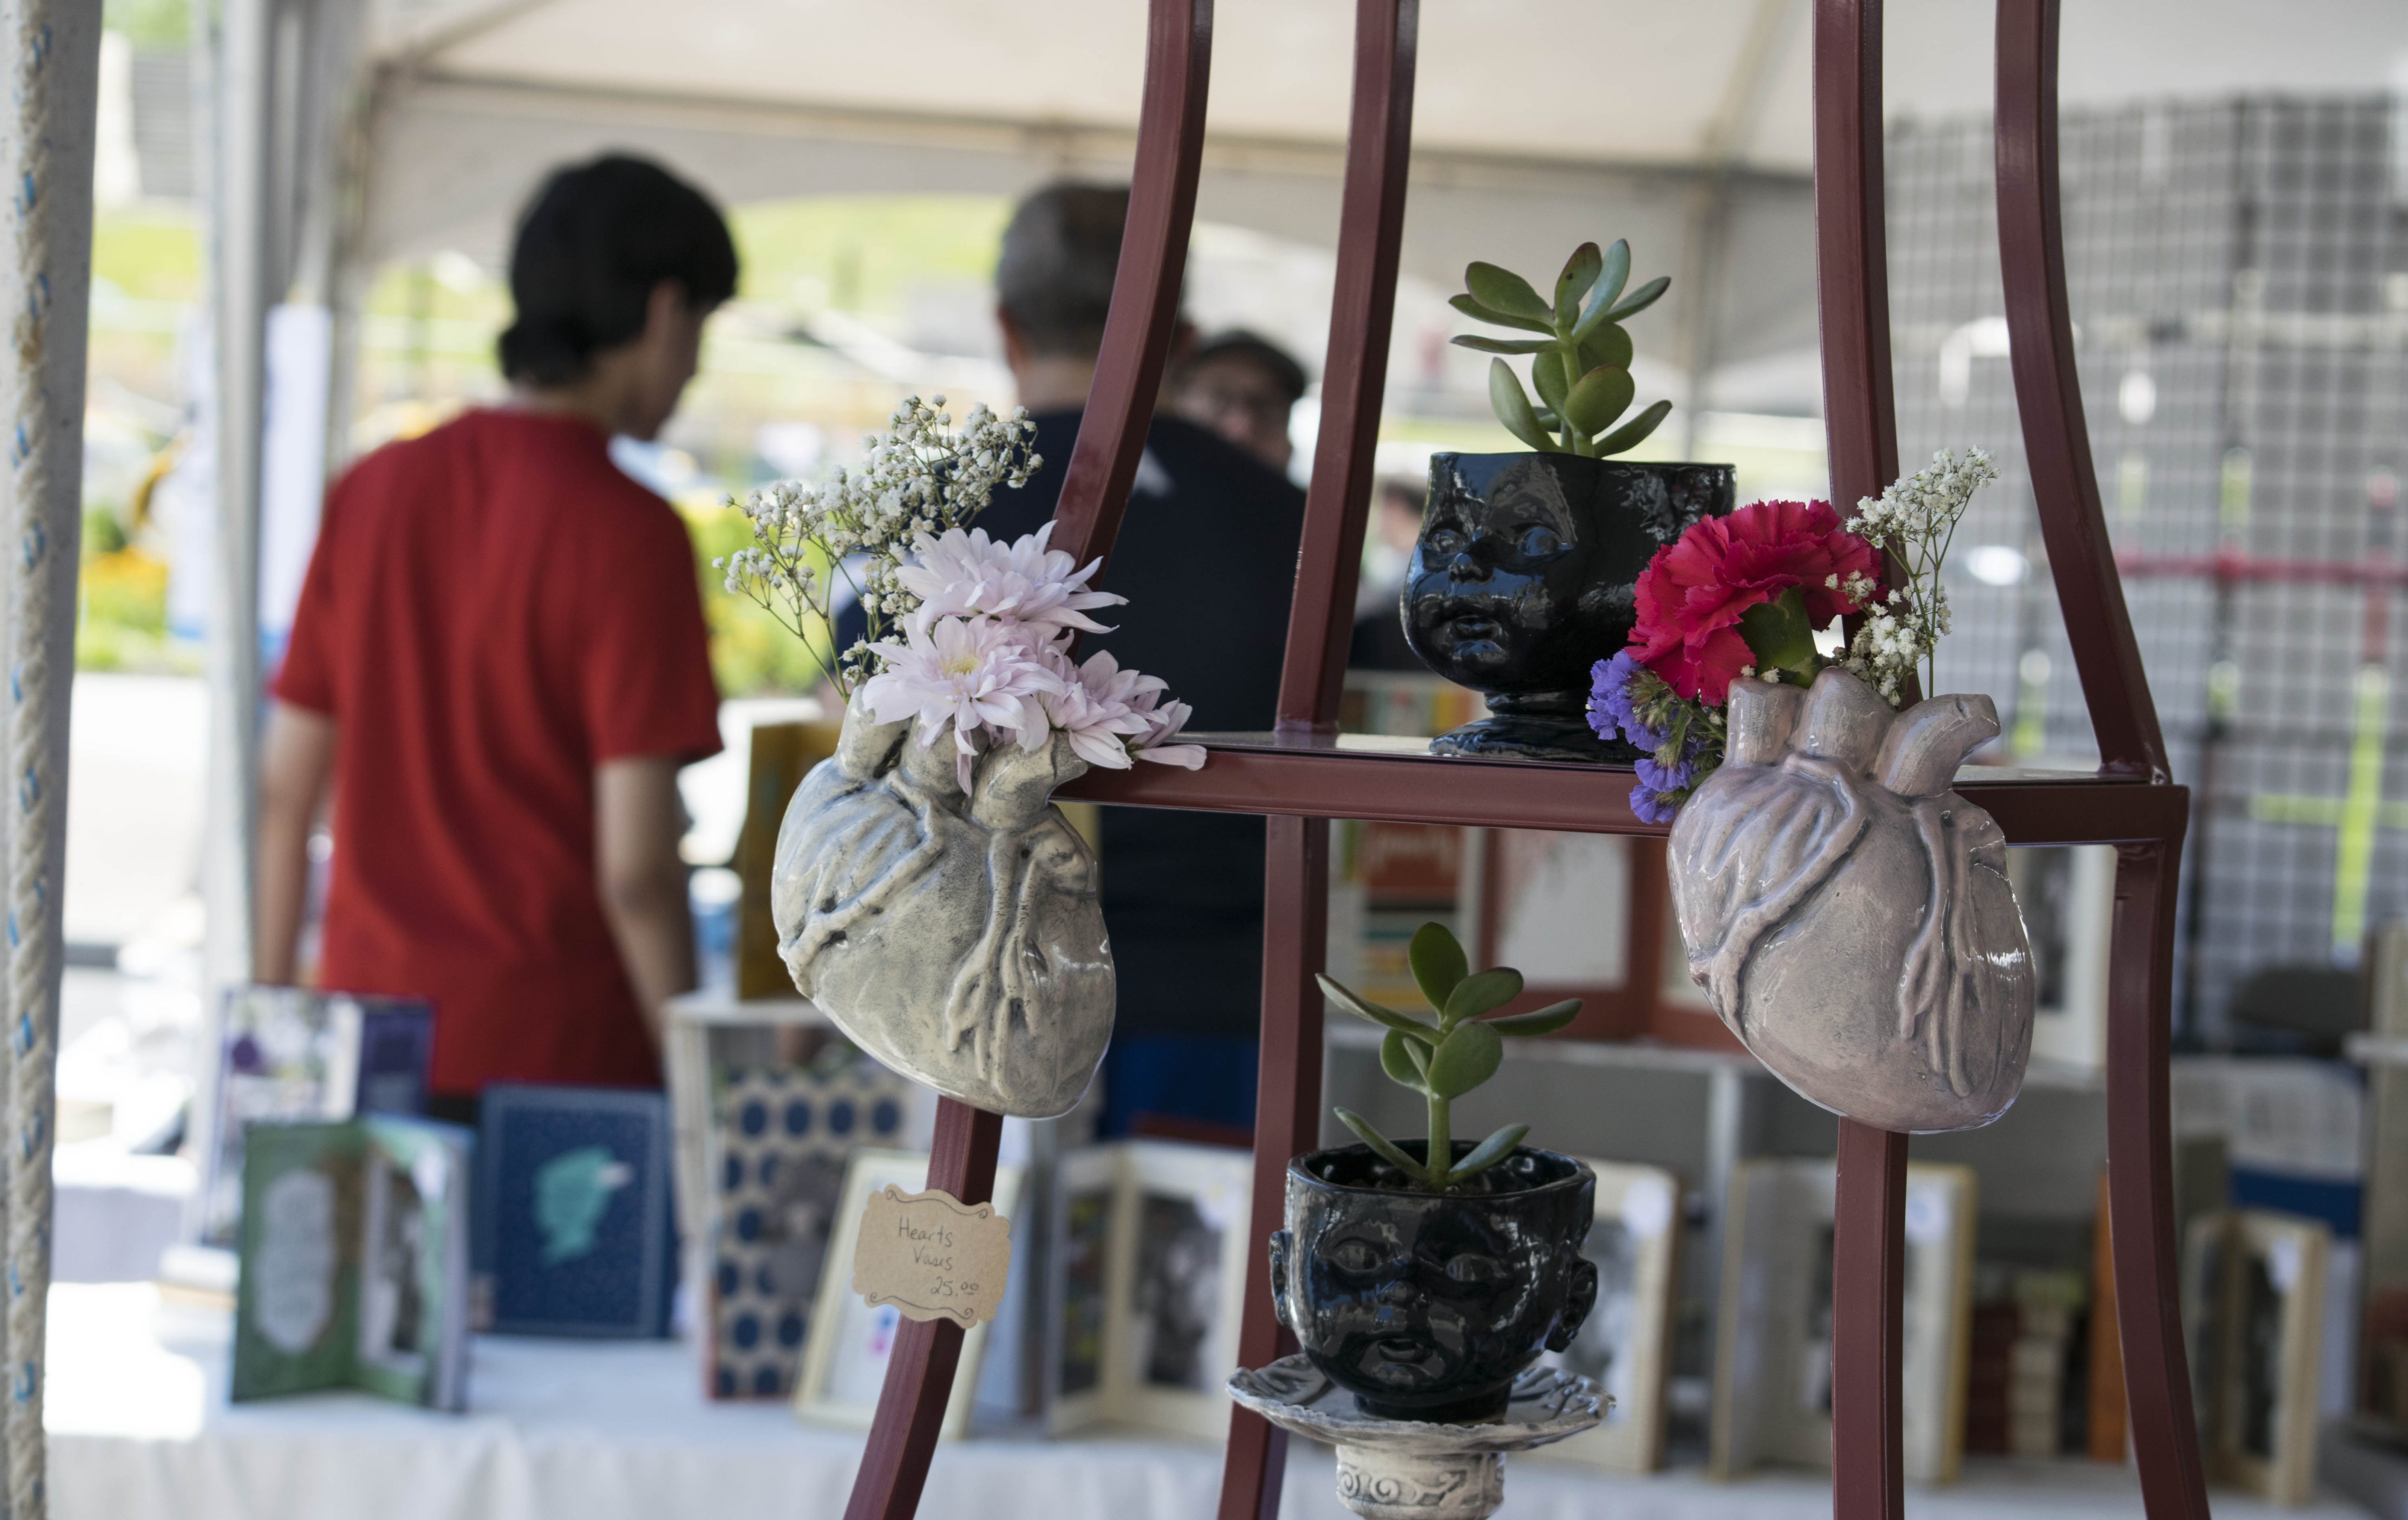 Indie craft, maker fair Strawberry Swing returning Sunday with KC love